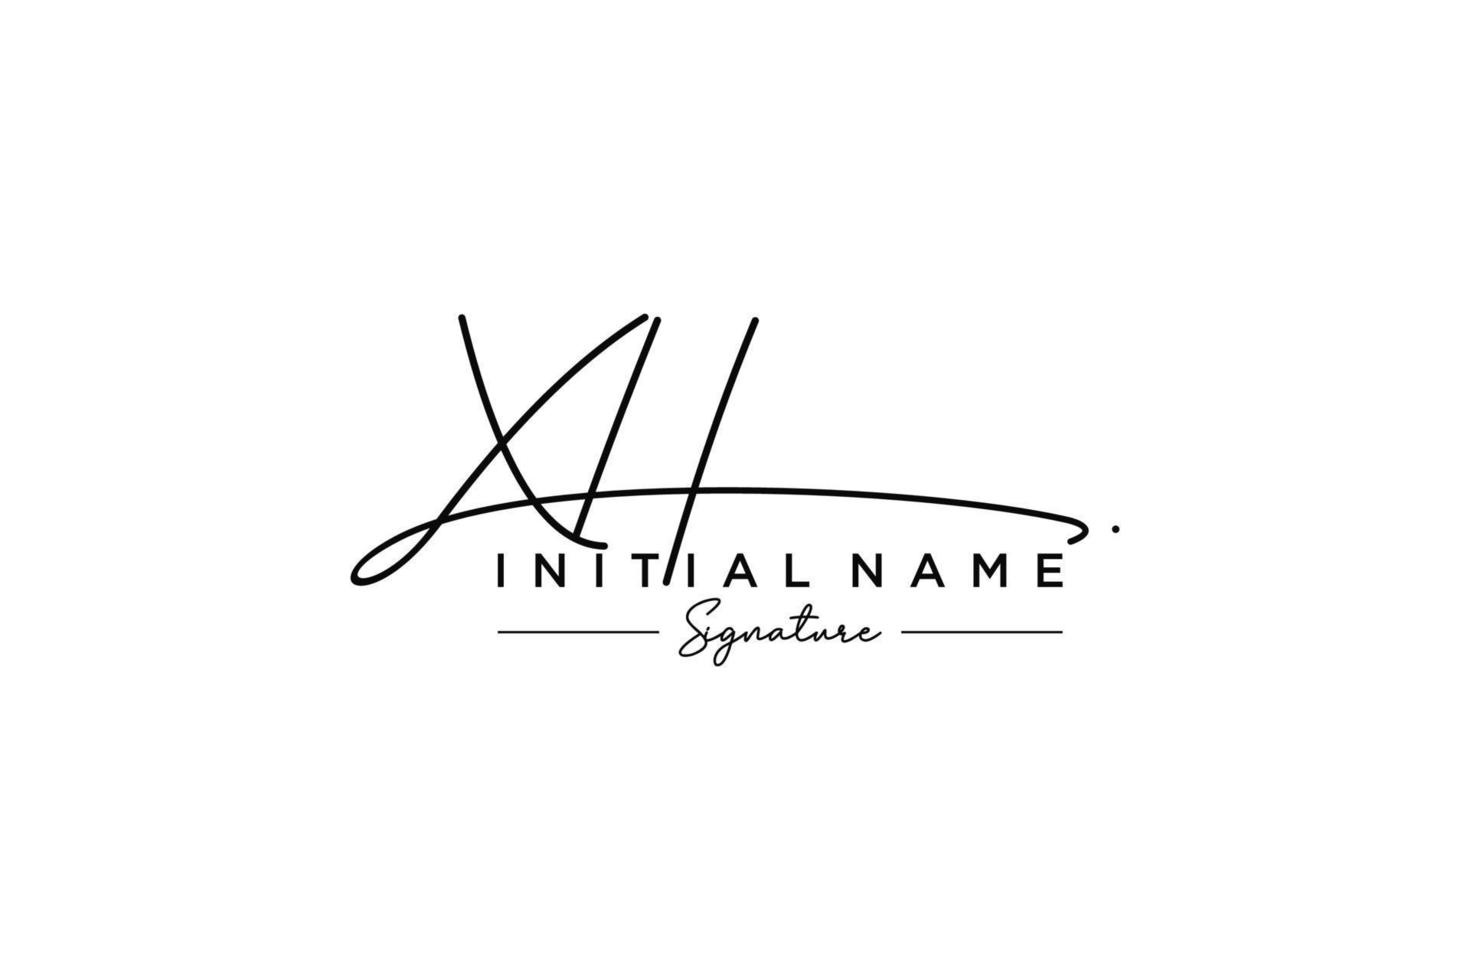 Initial XH signature logo template vector. Hand drawn Calligraphy lettering Vector illustration.